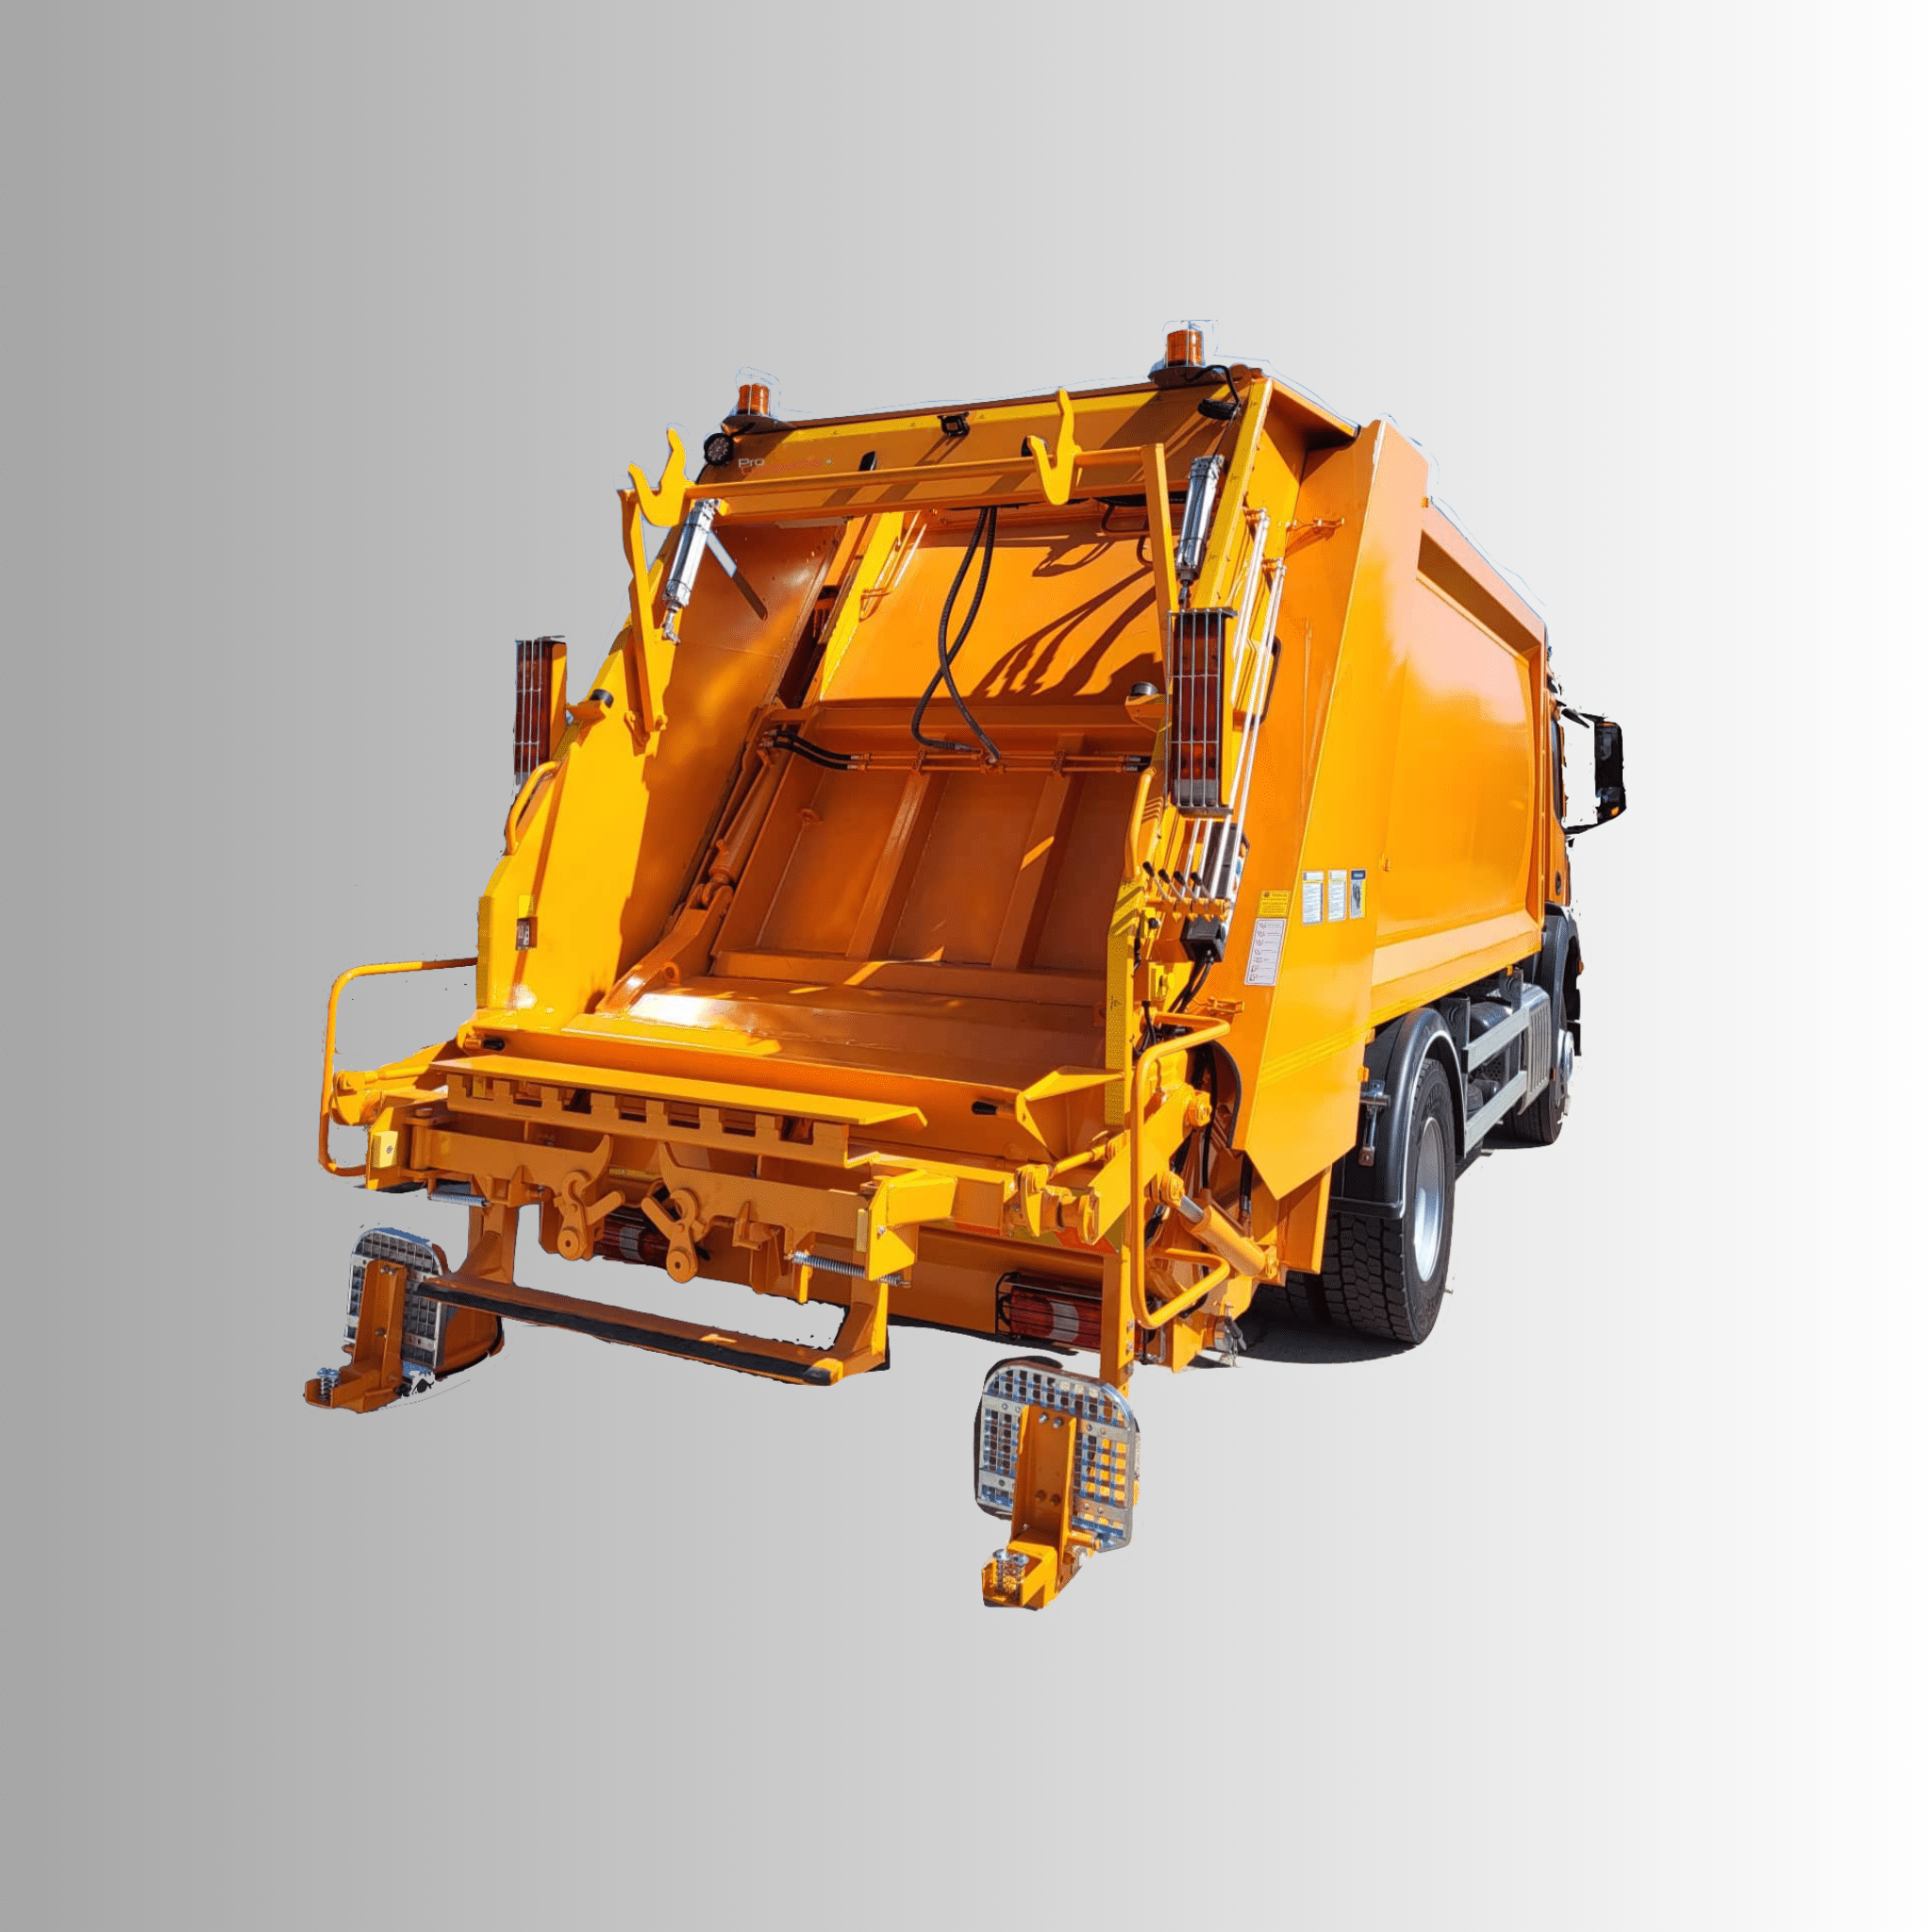 Refuse Garbage Compactor Truck is a type of municipal refuse vehicle that is specially designed to compress or compact trash into a more manageable size. They can be equipped with a crusher and screens, which help them ensure the garbage is the right size before being compacted. These trucks are usually outfitted with a large, sloped conveyor belt that ejects the waste from the back of the truck.